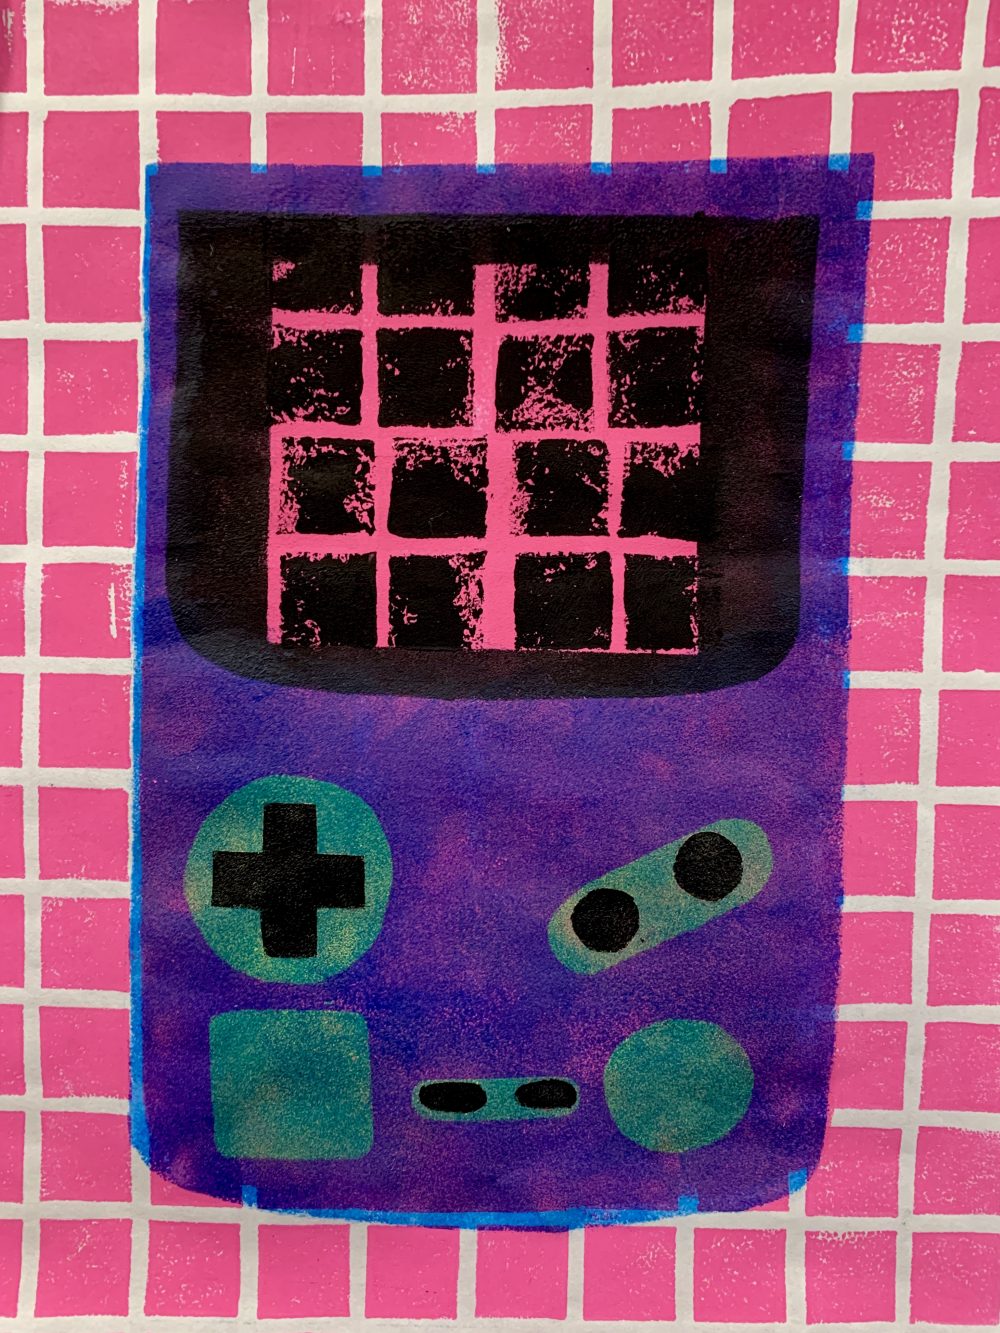 A stencil print of a brightly colored handheld gaming console.